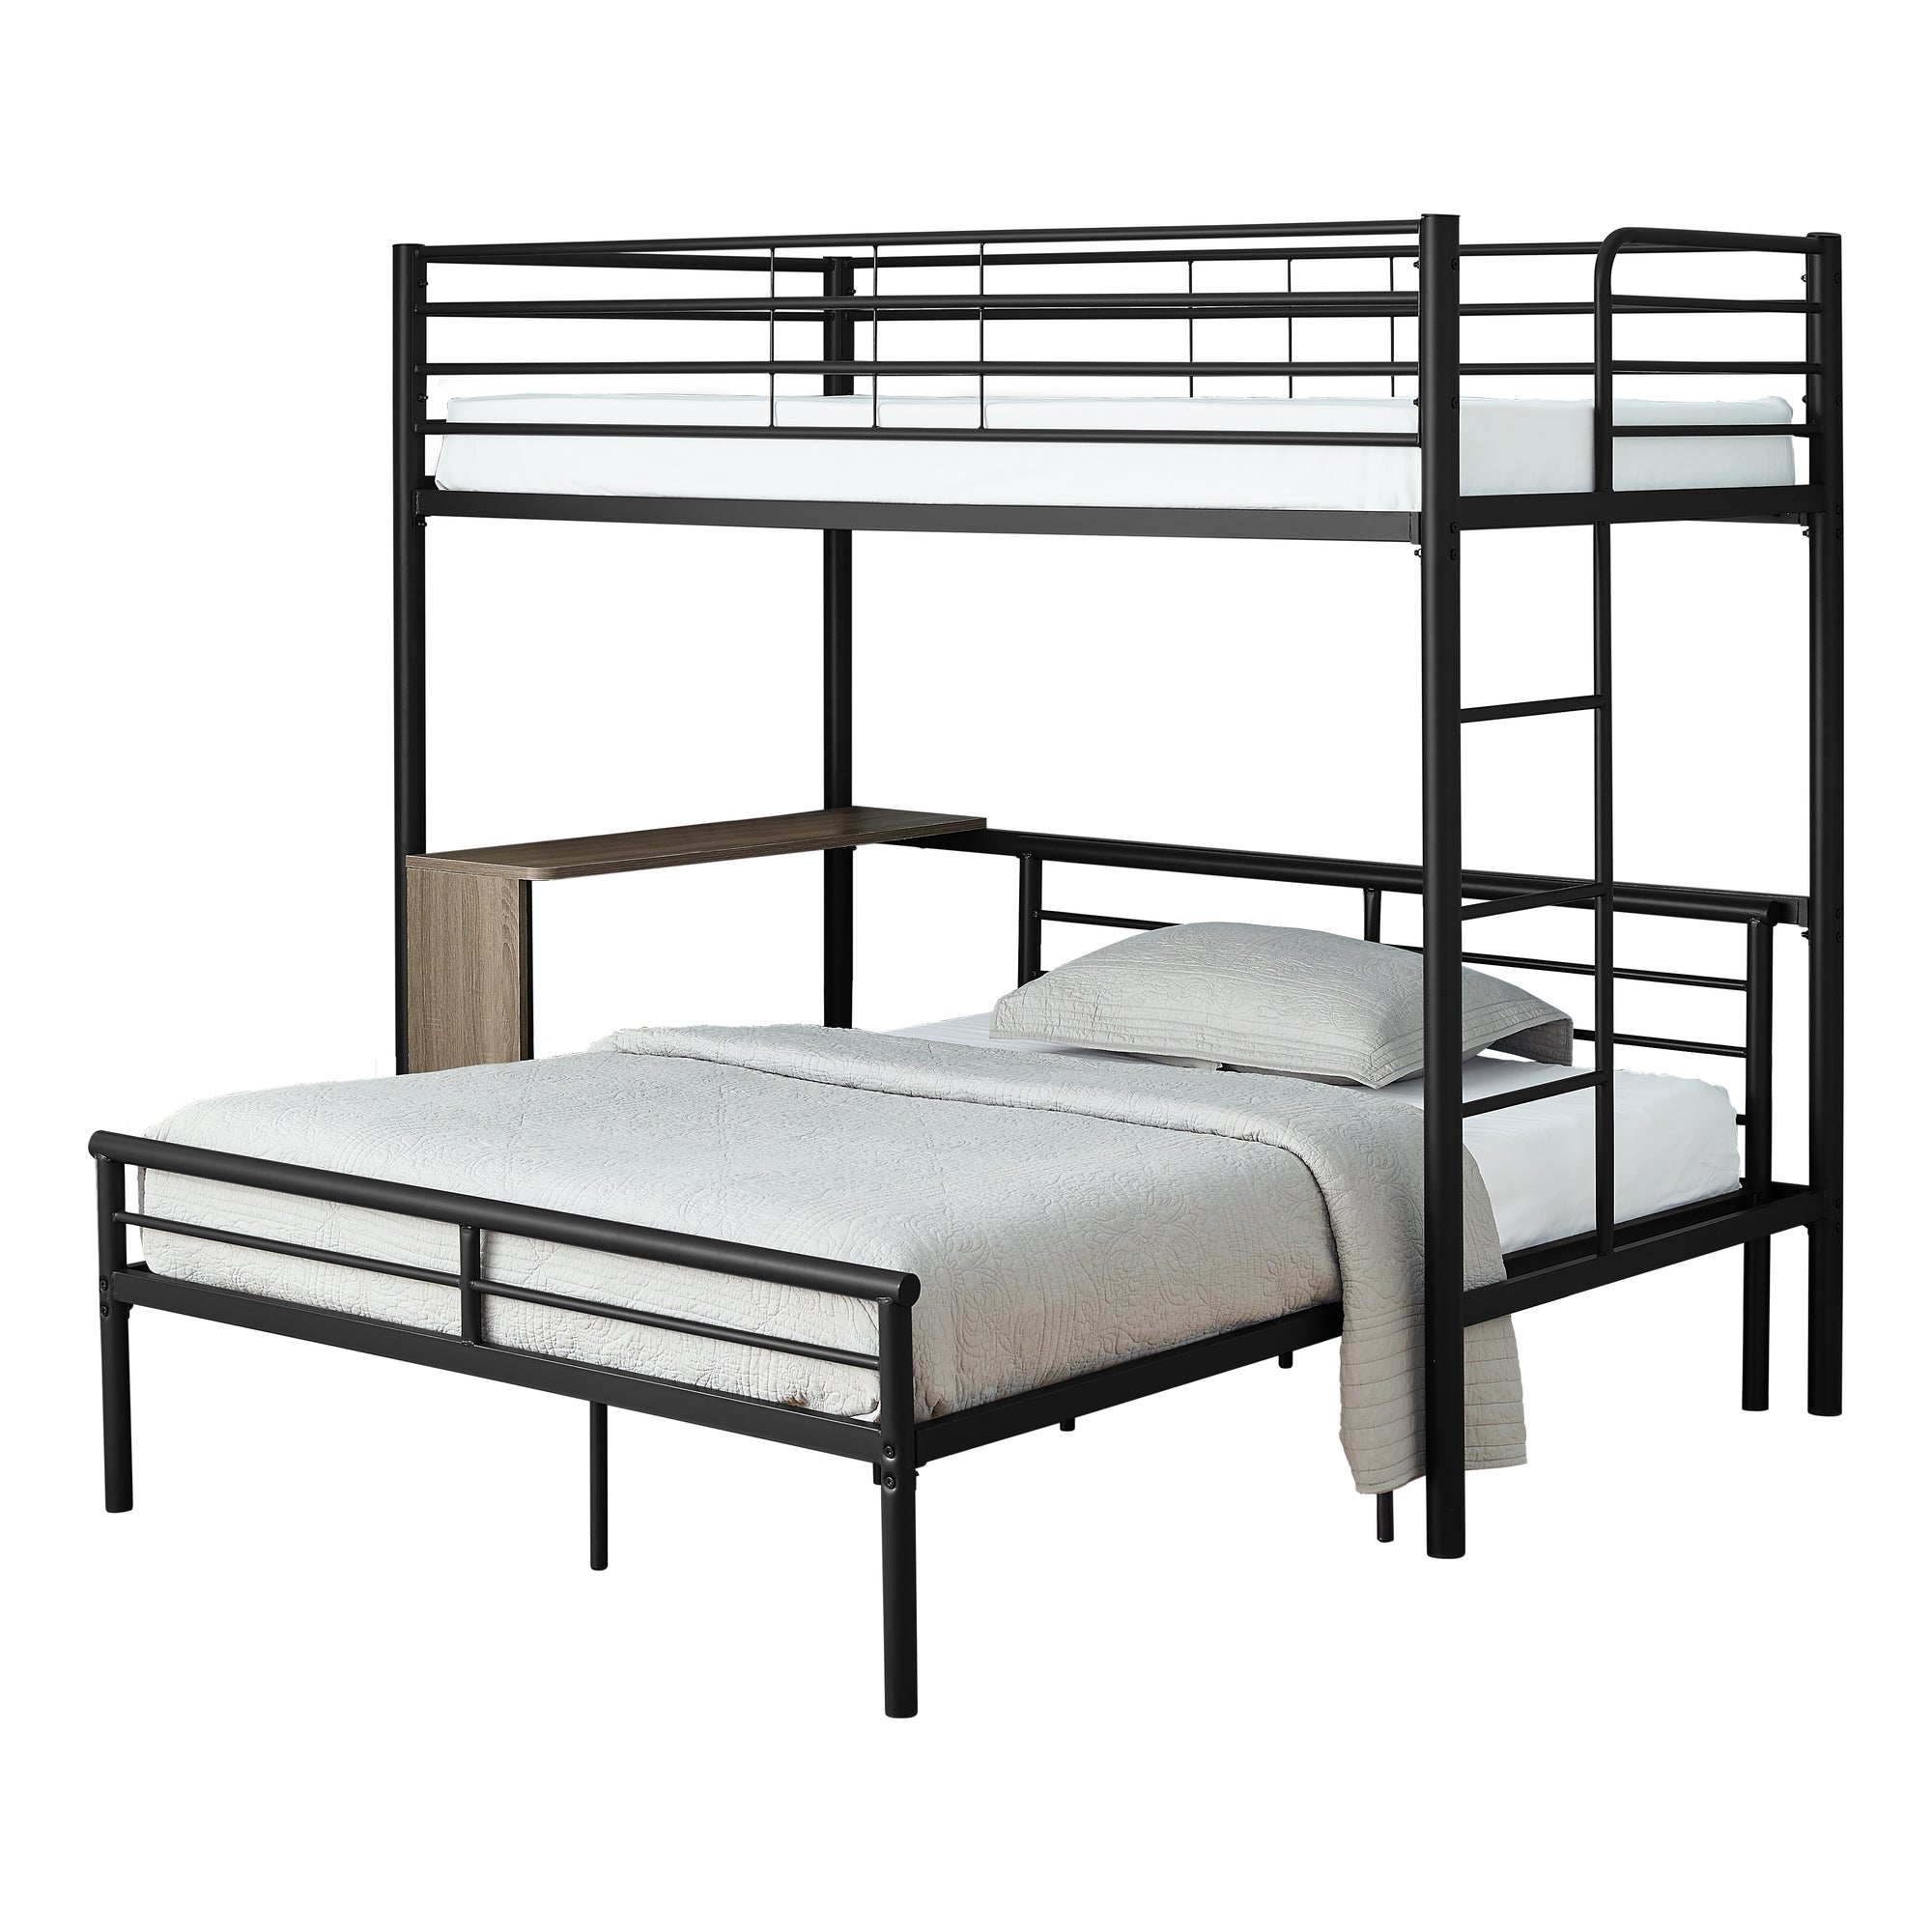 Bunk Bed - Twin / Full Size - Taupe Desk / Black Metal